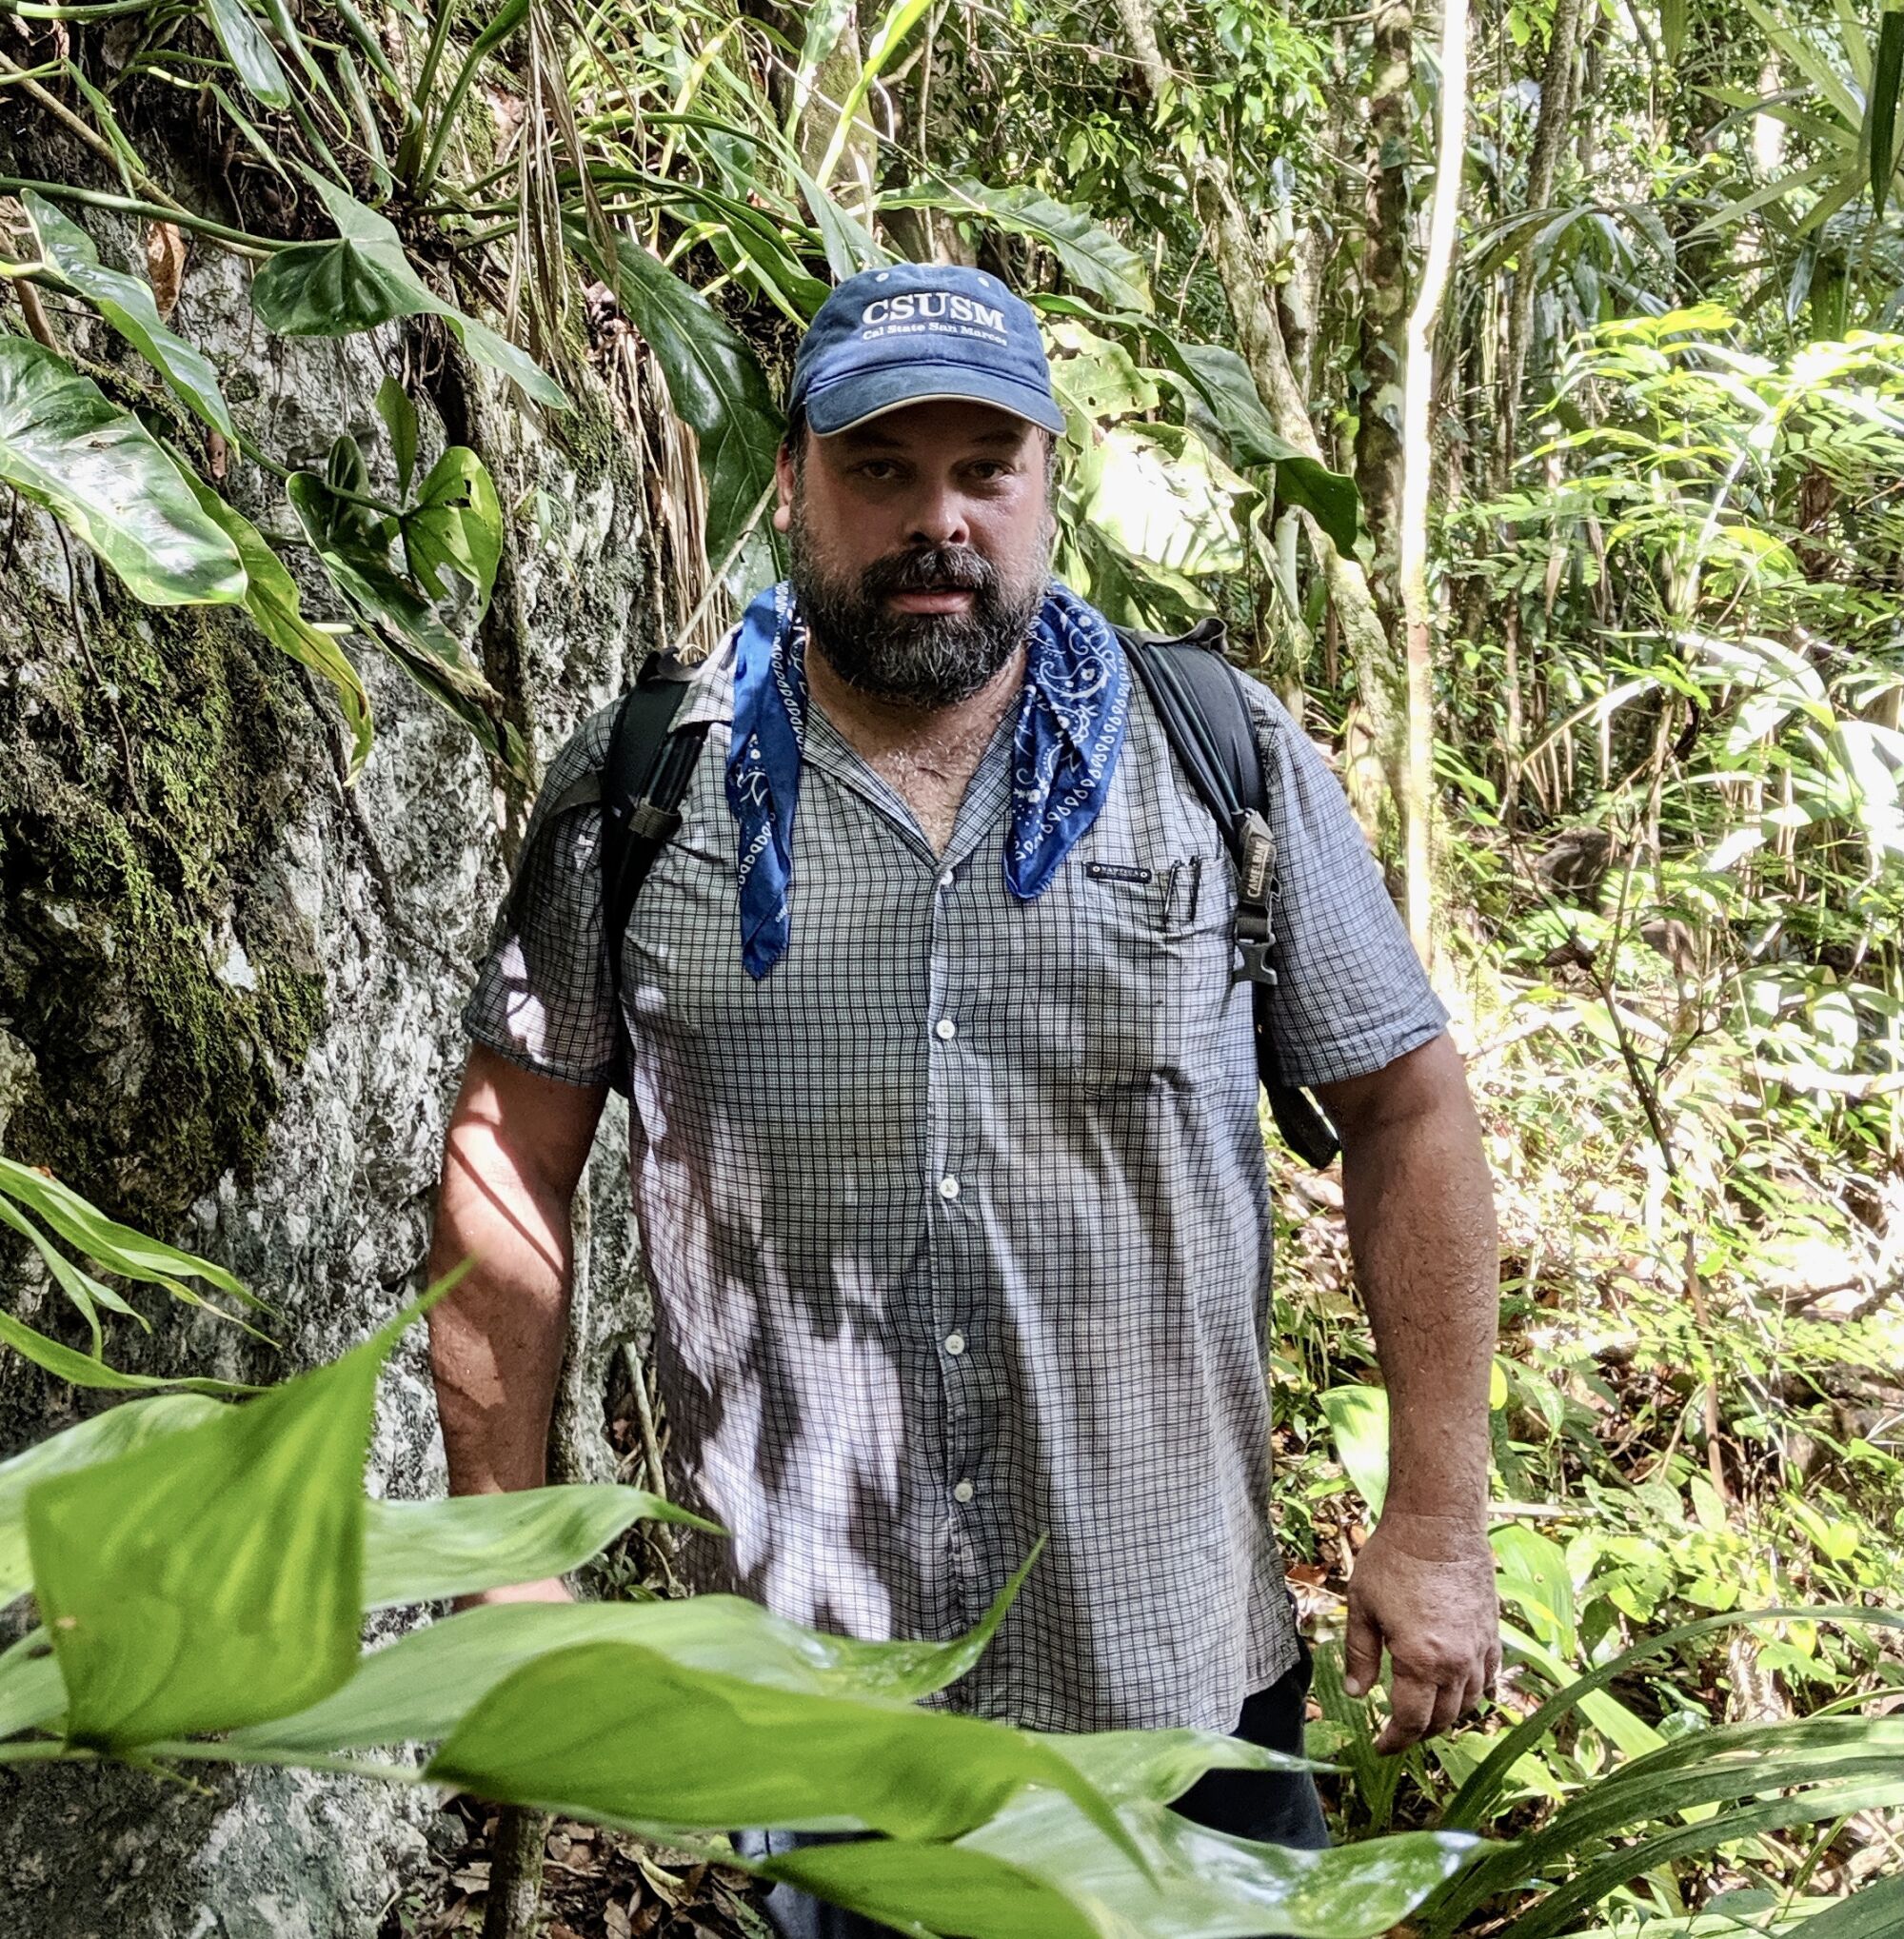 Jon Spenard will return to a remote area of Belize to continue his research on ancient Maya life.